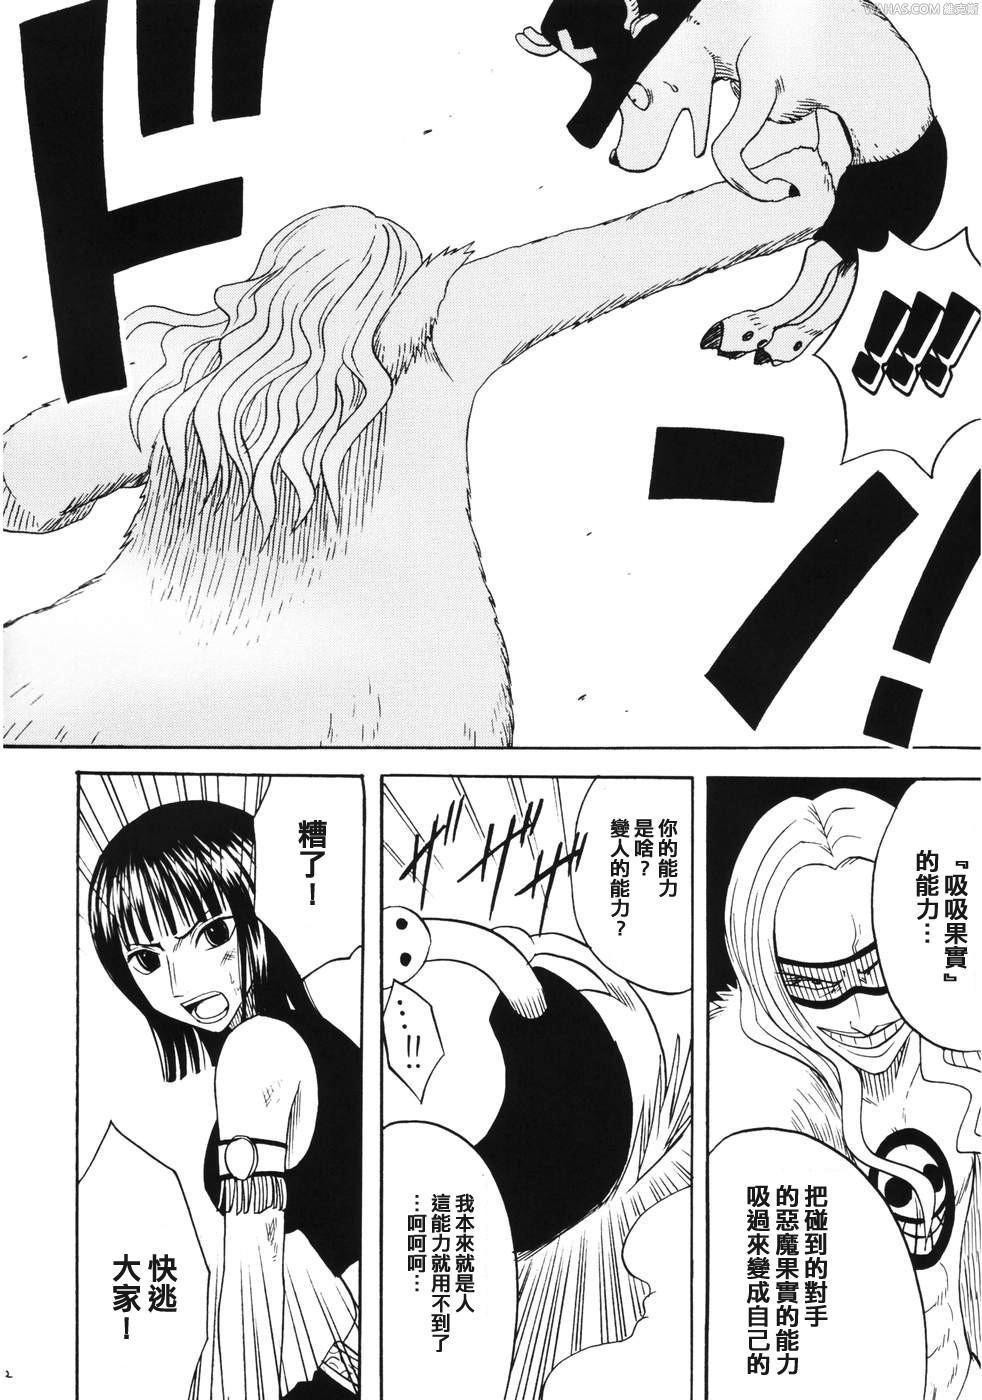 Tit Dancing Animation Run - One piece Lovers - Page 11